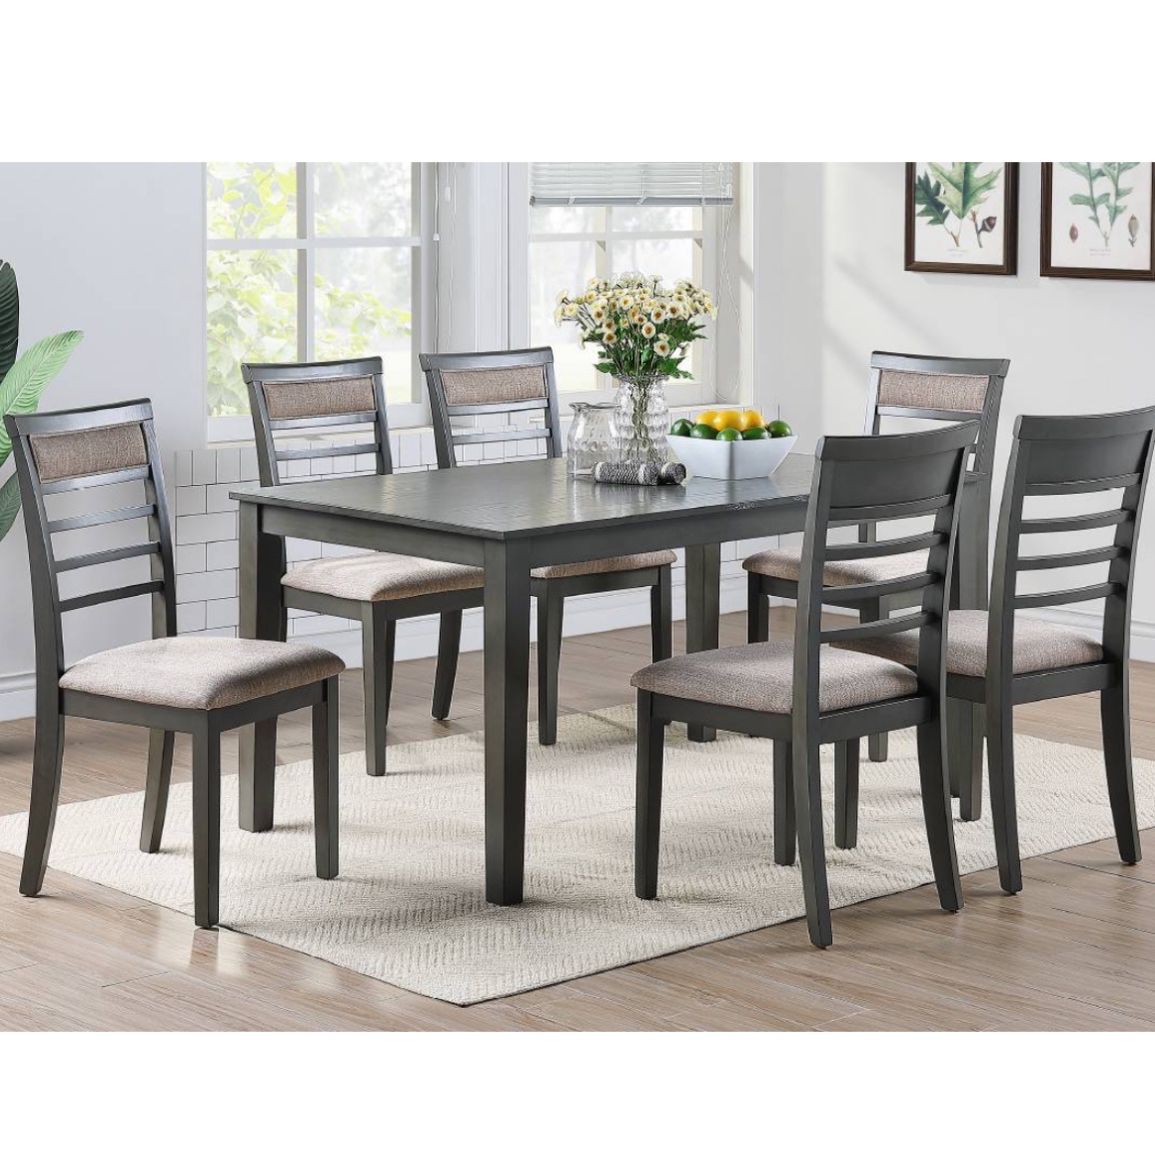 Dining Table Set Brand New In Box